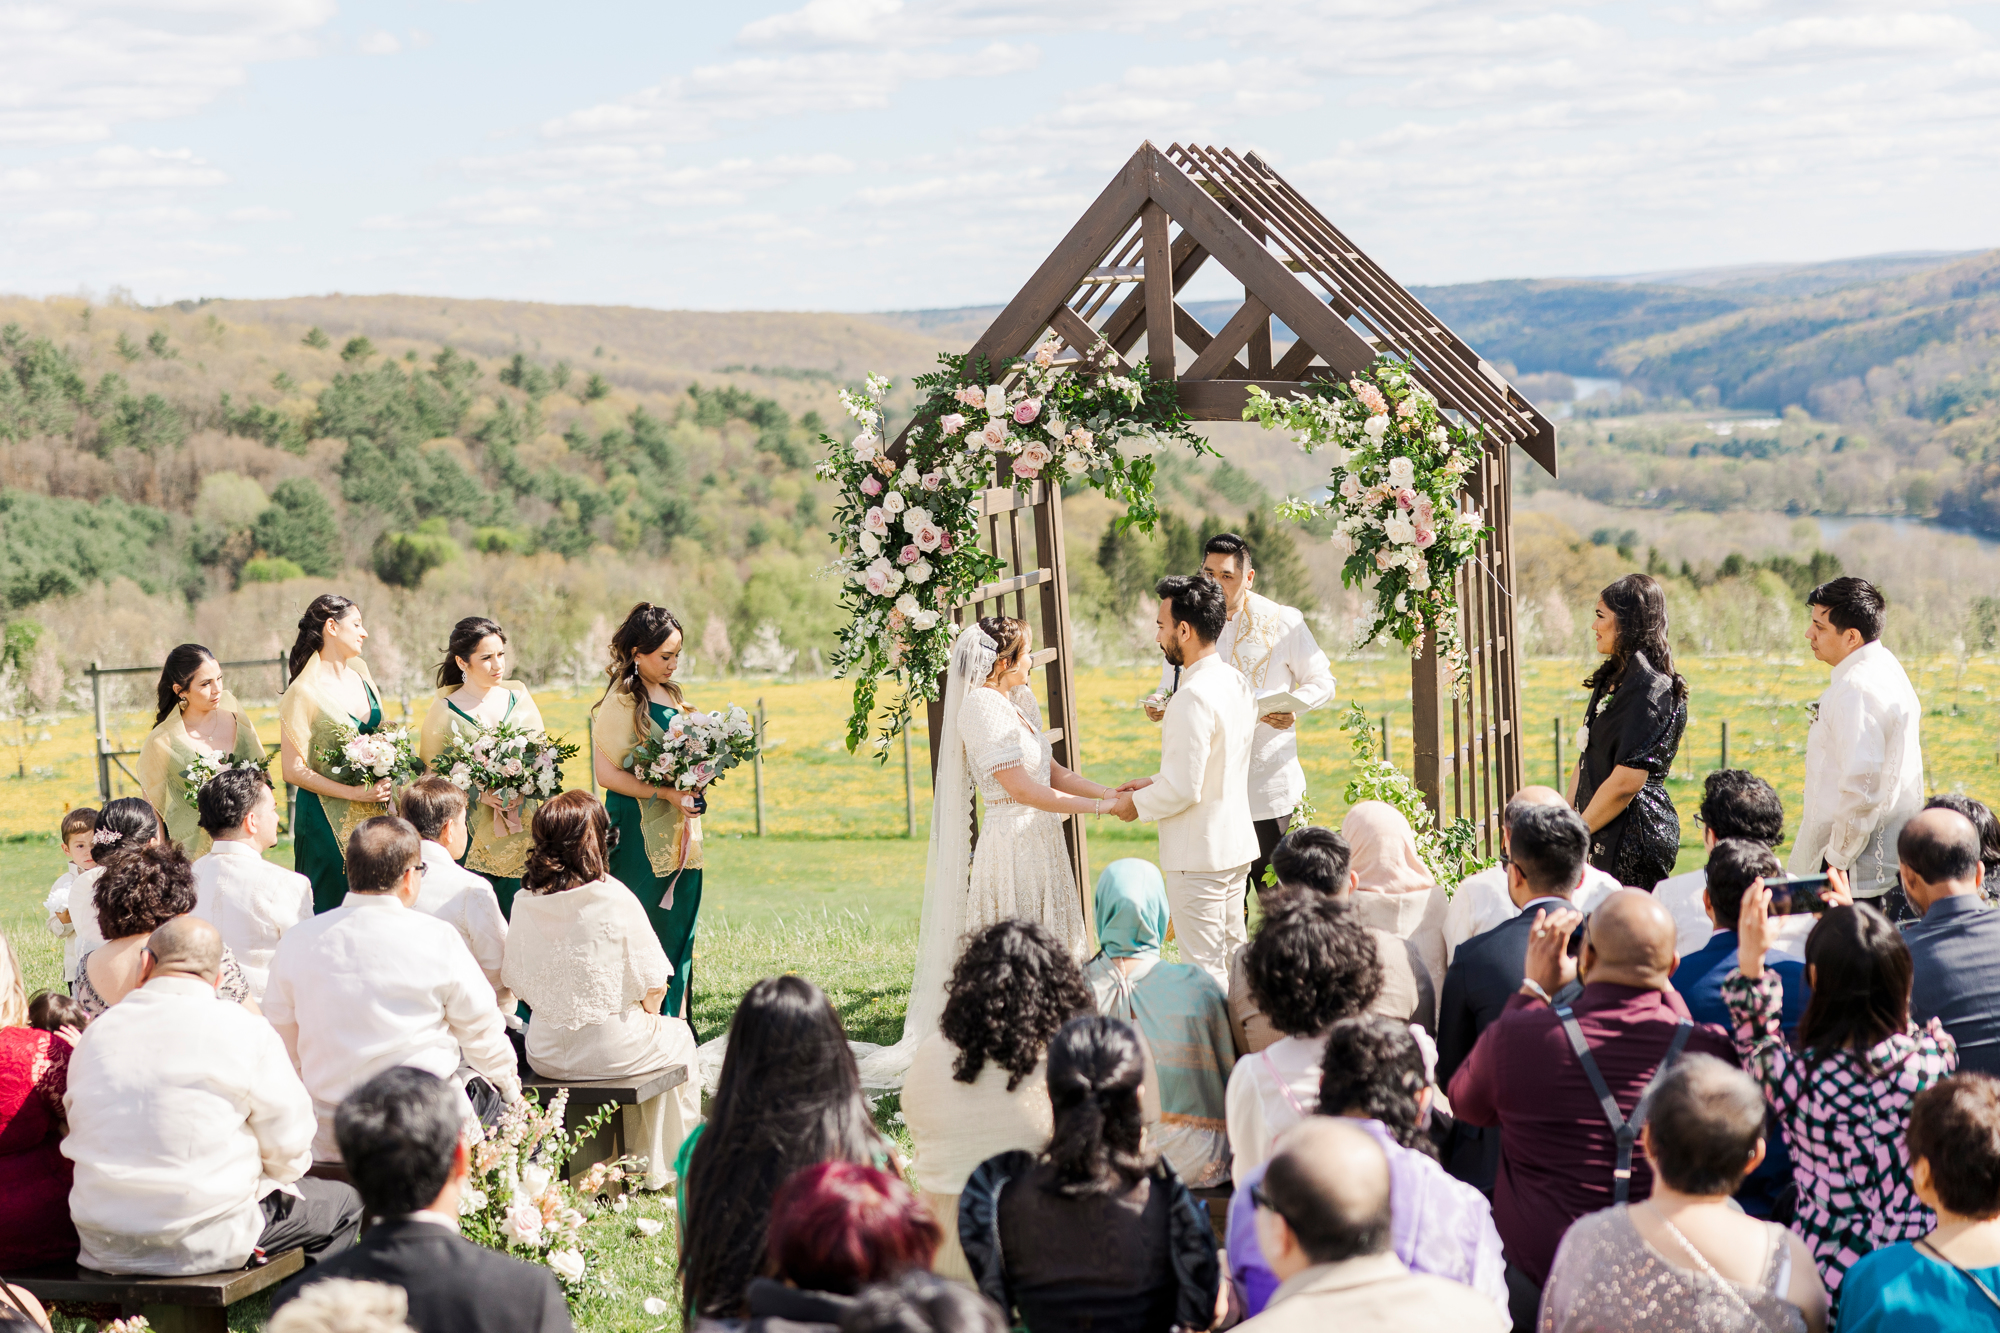 Amazing Seminary Hill Wedding in the Summertime